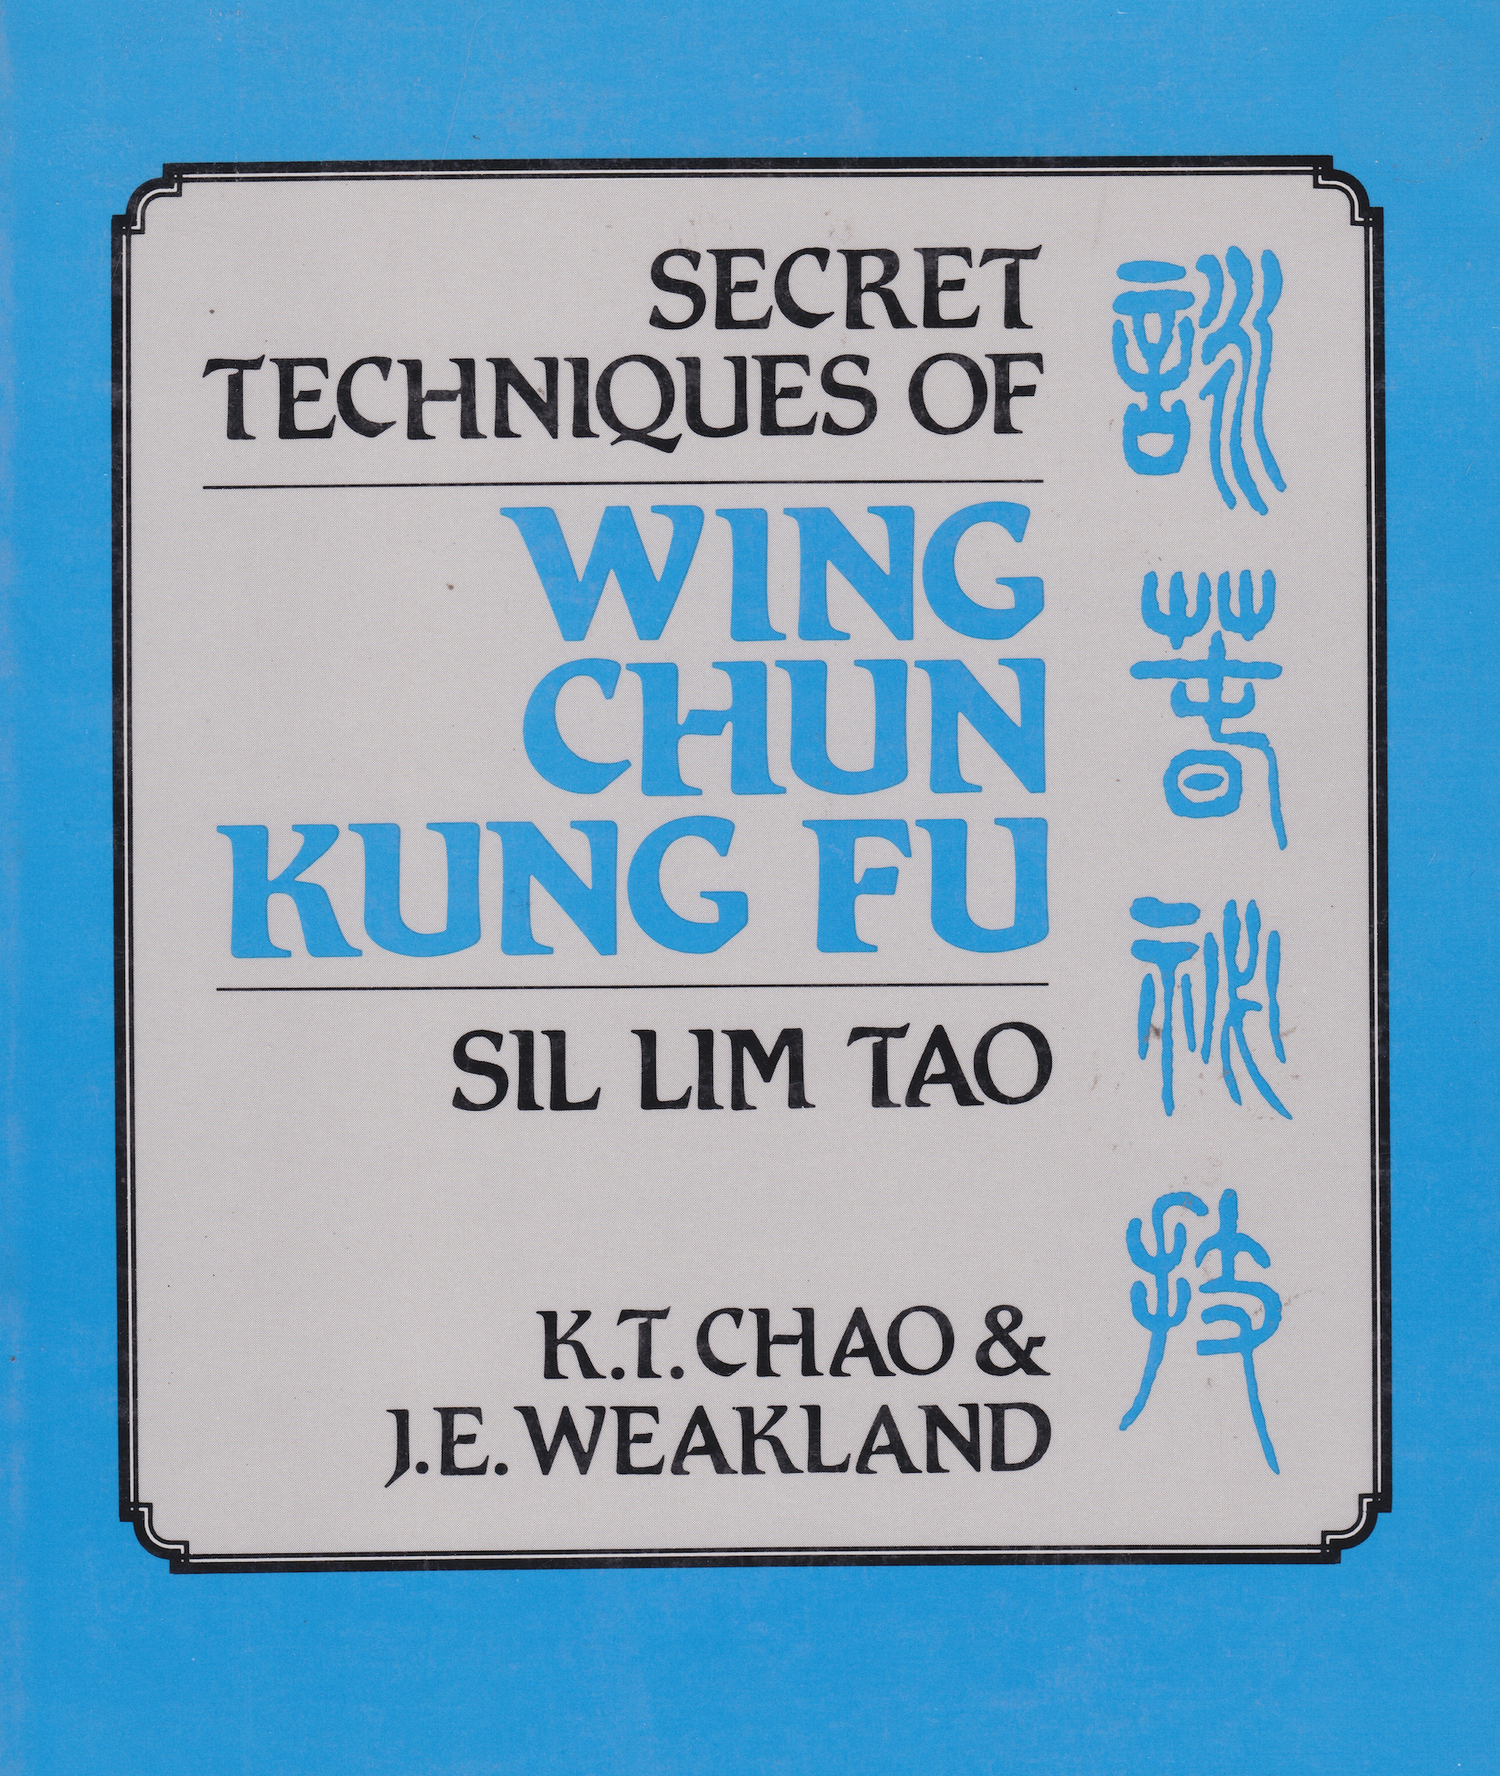 Secret Techniques of Wing Chun Kung Fu: Sil Lim Tao Book by KT Chao & JE Weakland (Preowned)